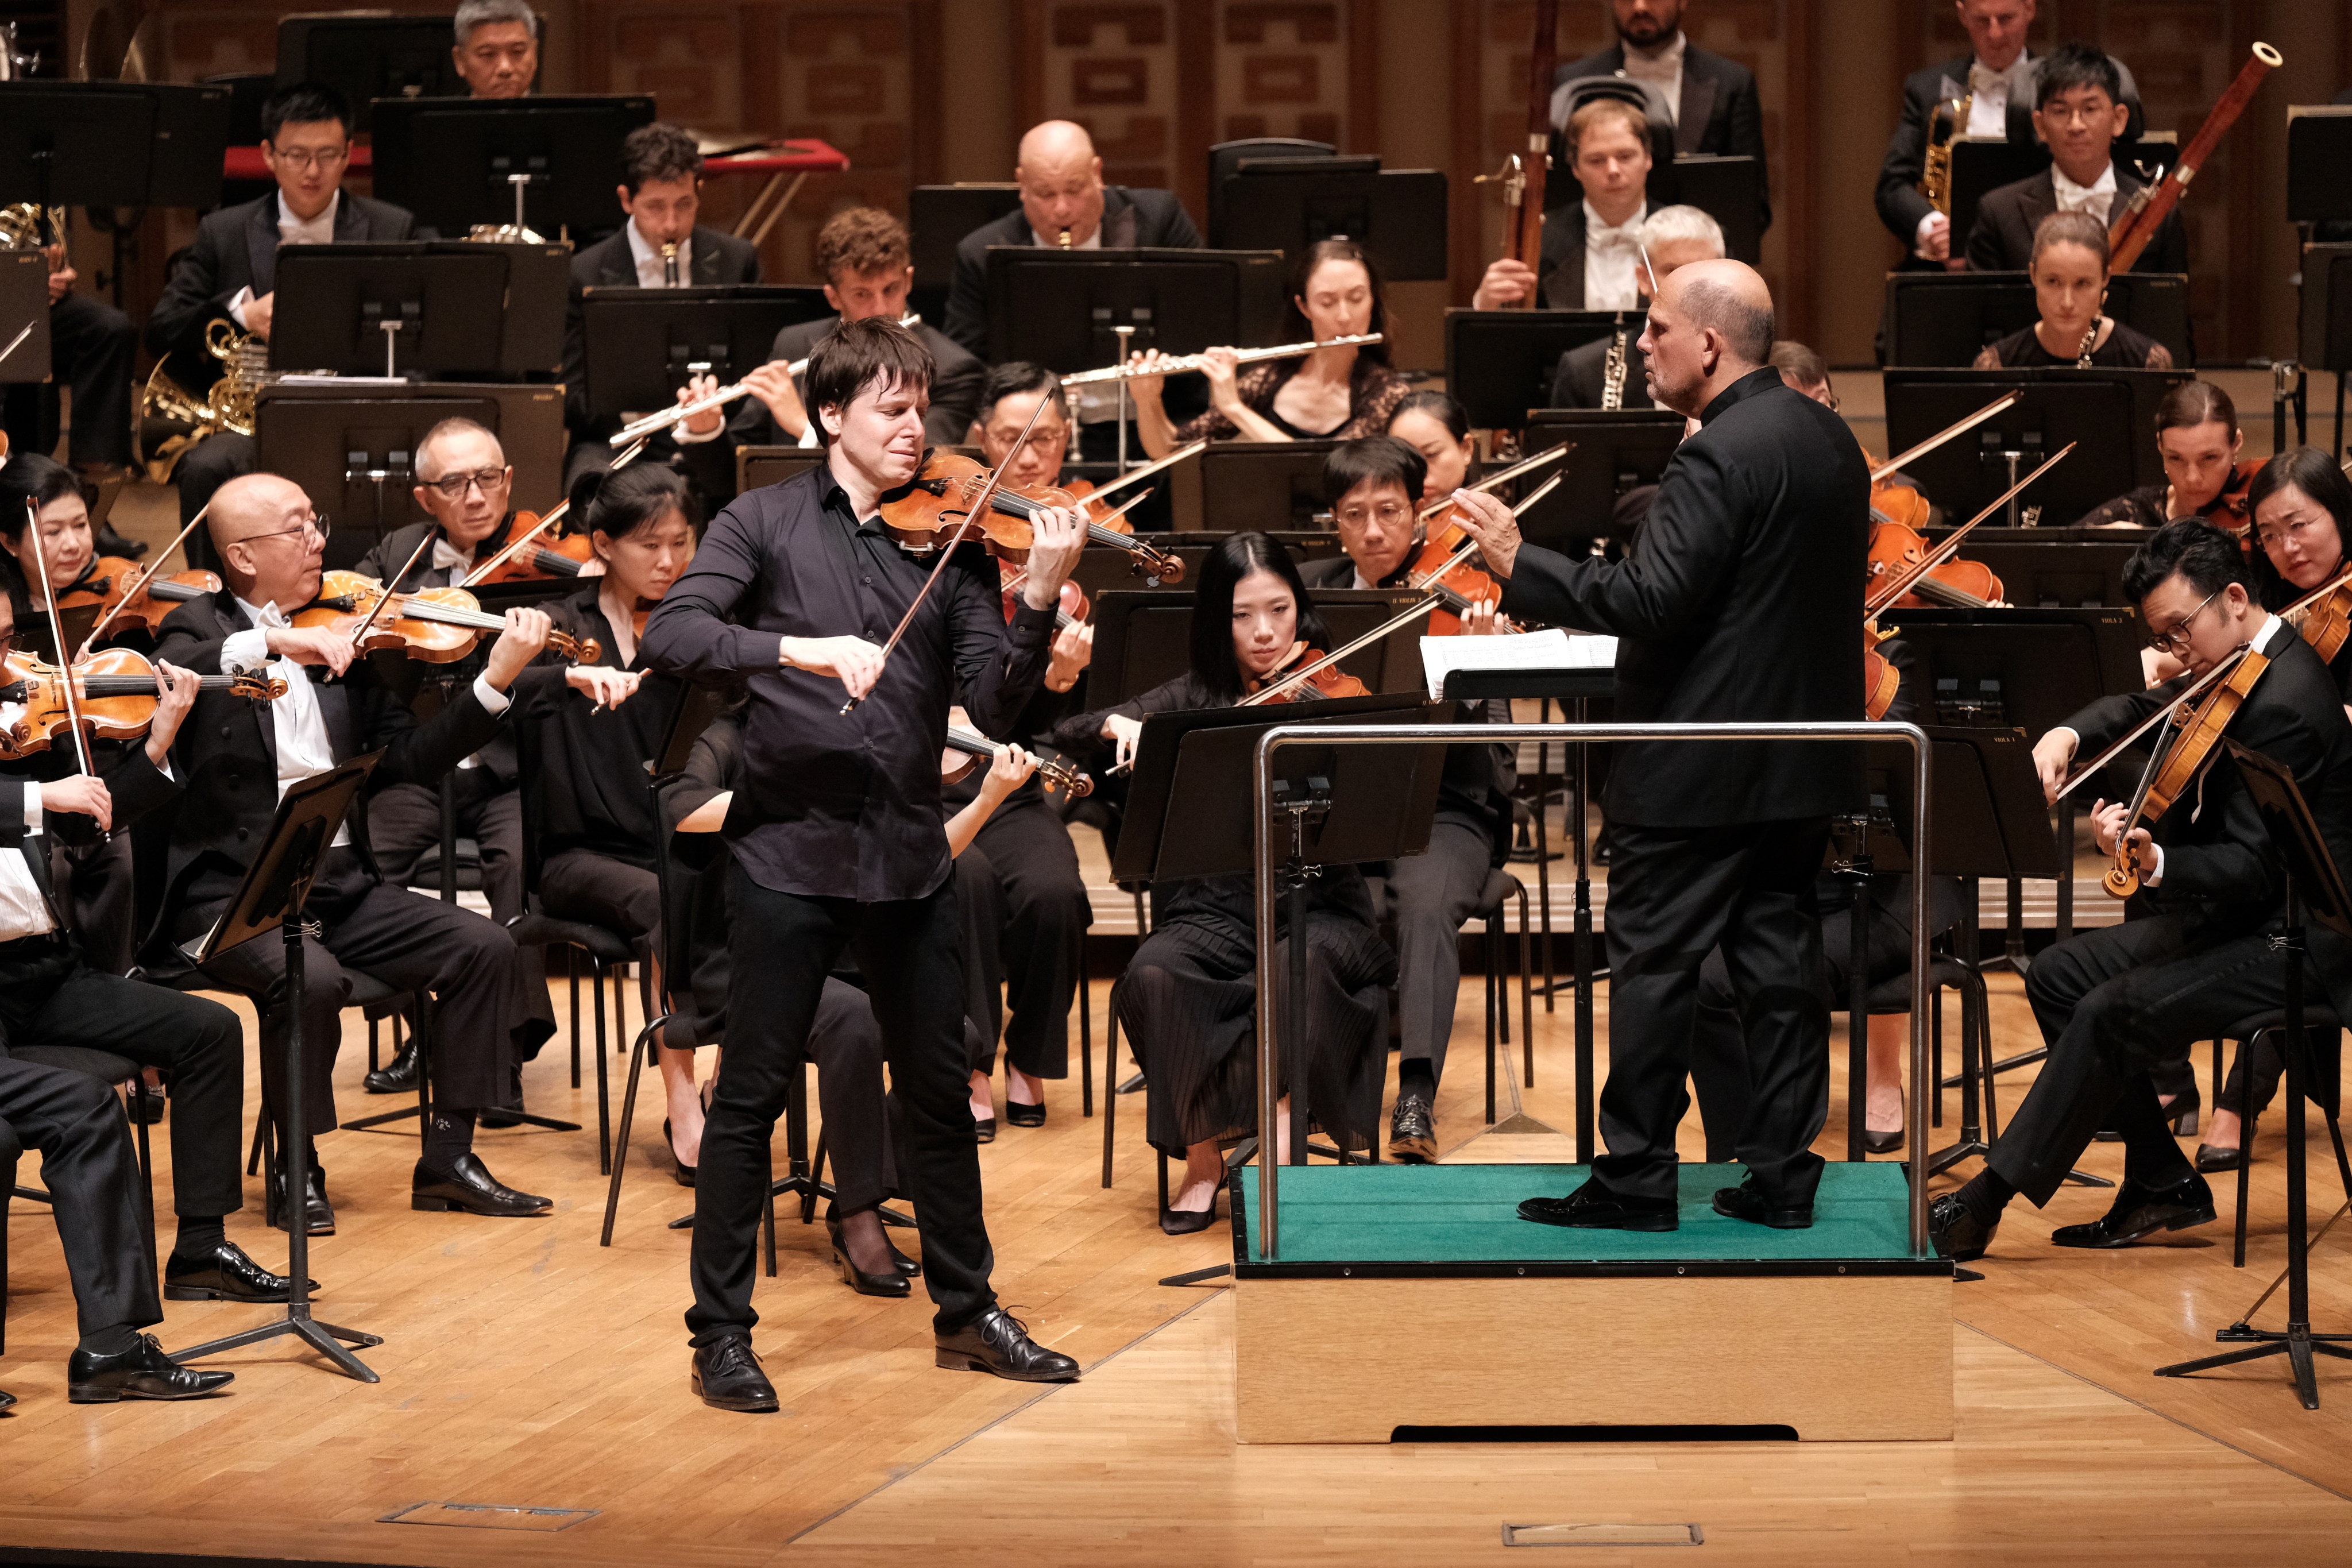 Violinist Joshua Bell will reunite on stage with the Hong Kong Philharmonic Orchestra and music director Jaap van Zweden for the ensemble’s 50th season opener in September, which will feature the Asian premiere of Bell’s new collaborative work, The Elements. Photo: Ka Lam/HK Phil